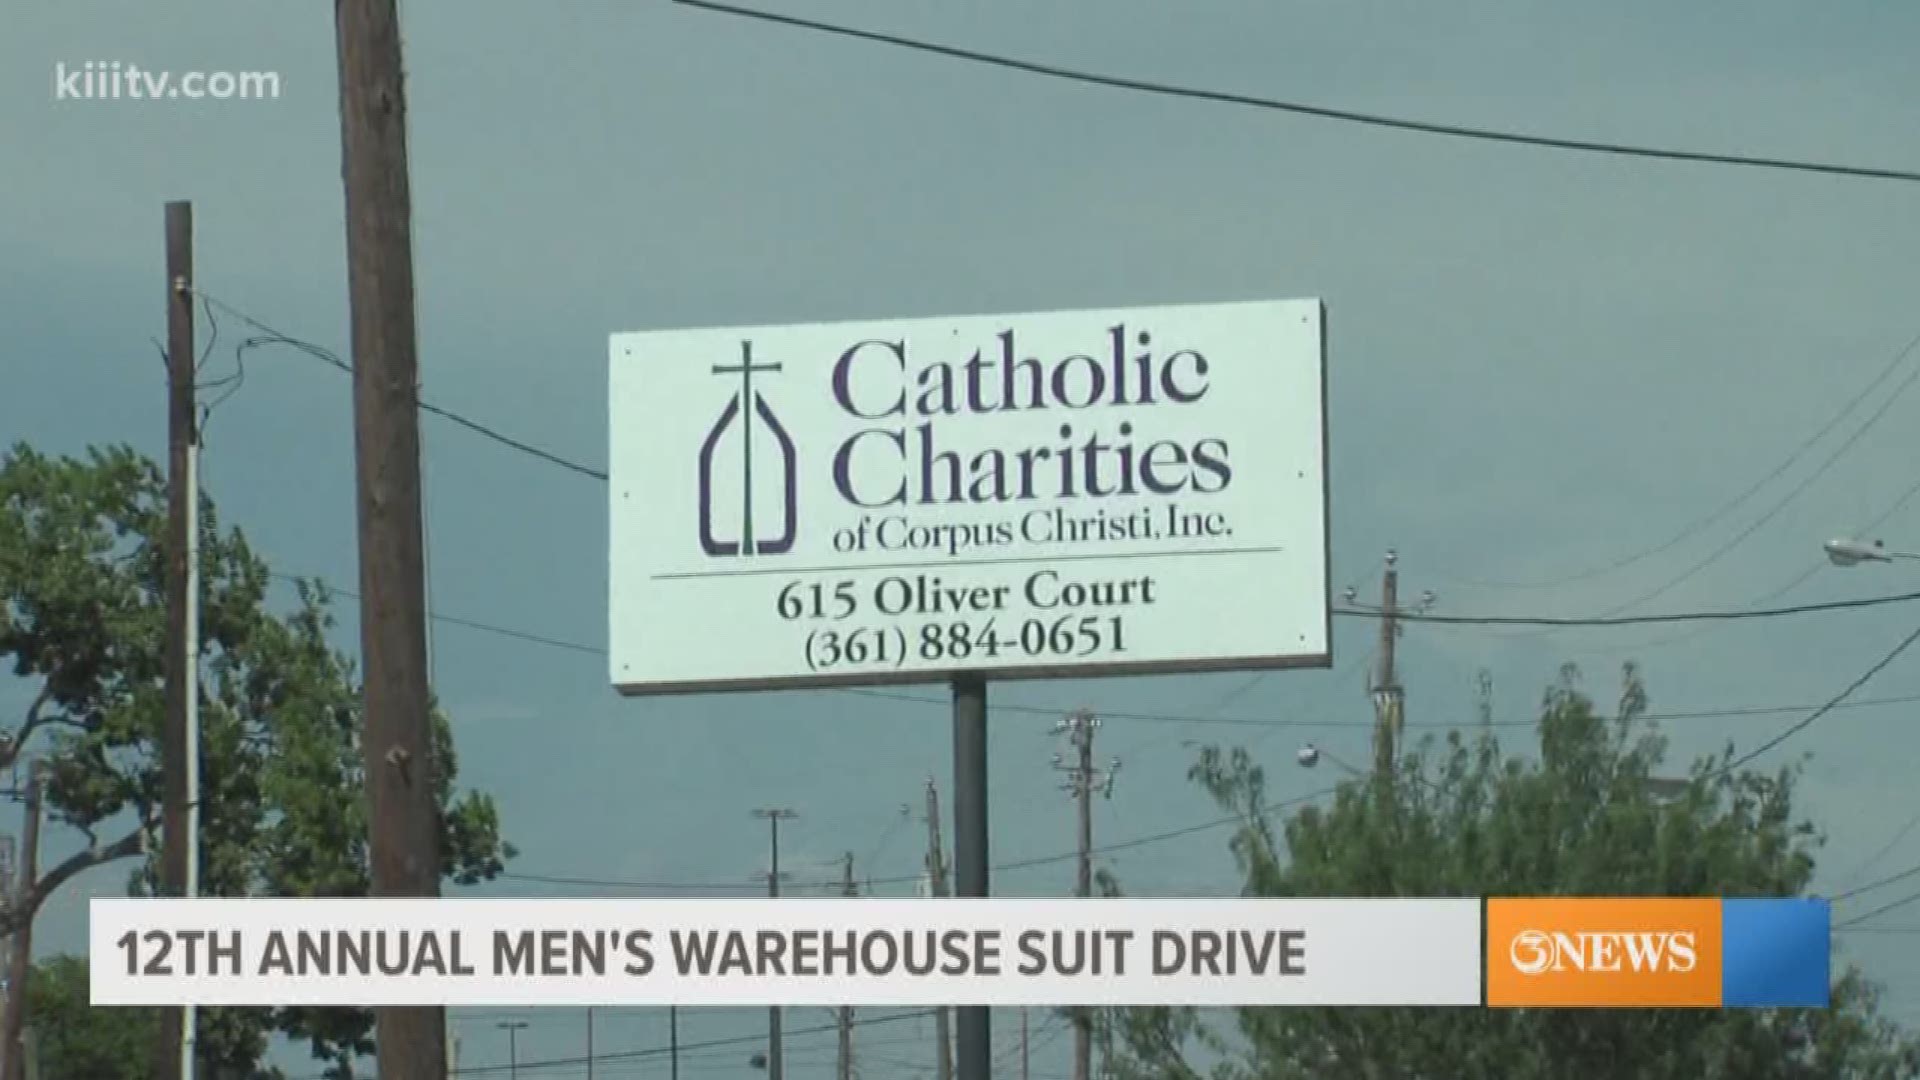 Get fitted in a new suit donated through Men's Wearhouse.